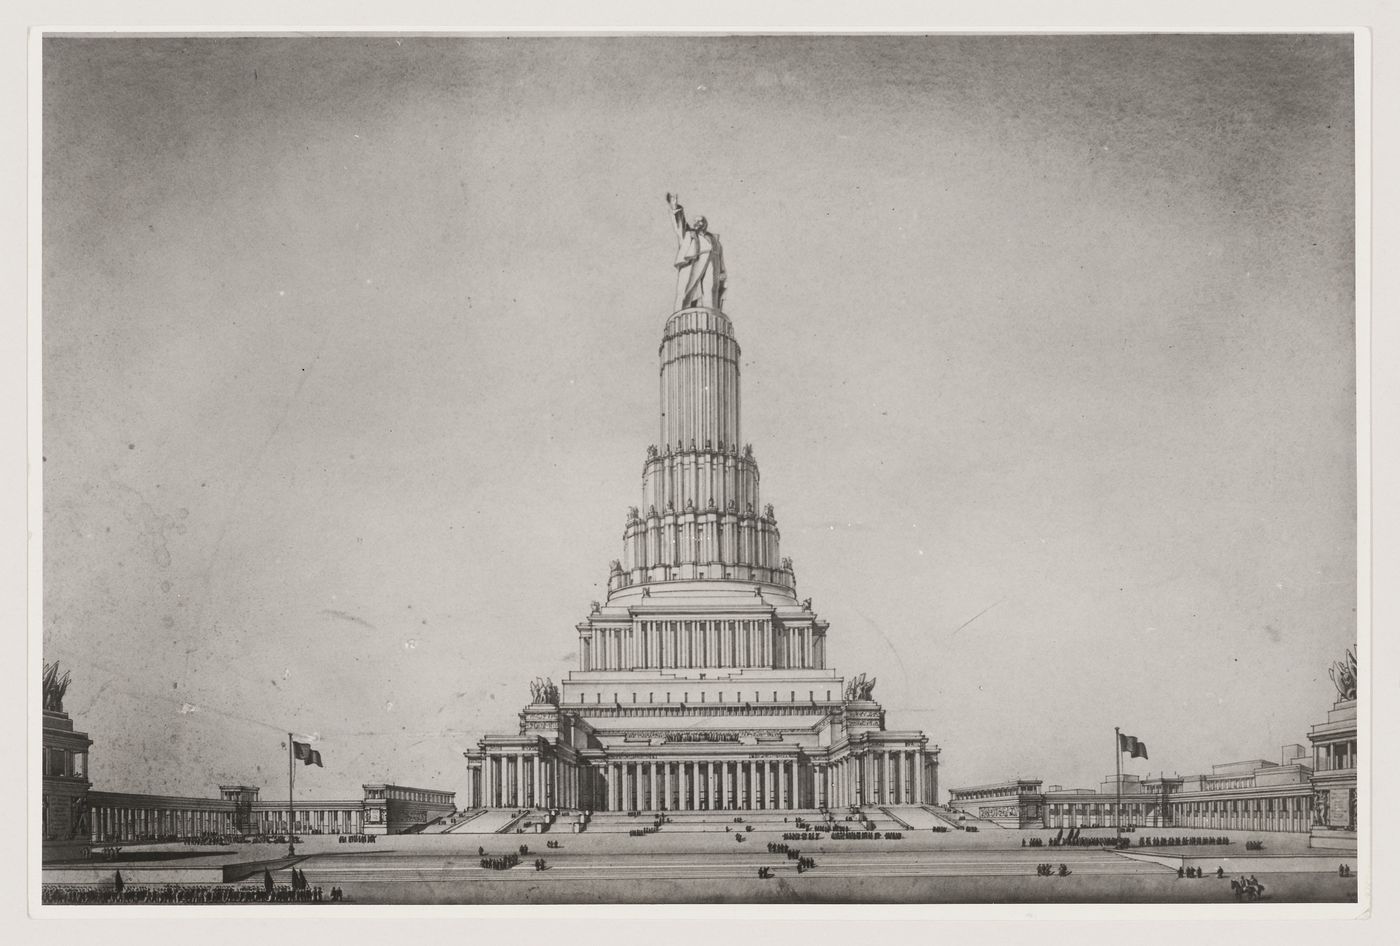 Photograph of a perspective drawing for a Palace of Soviets, Moscow